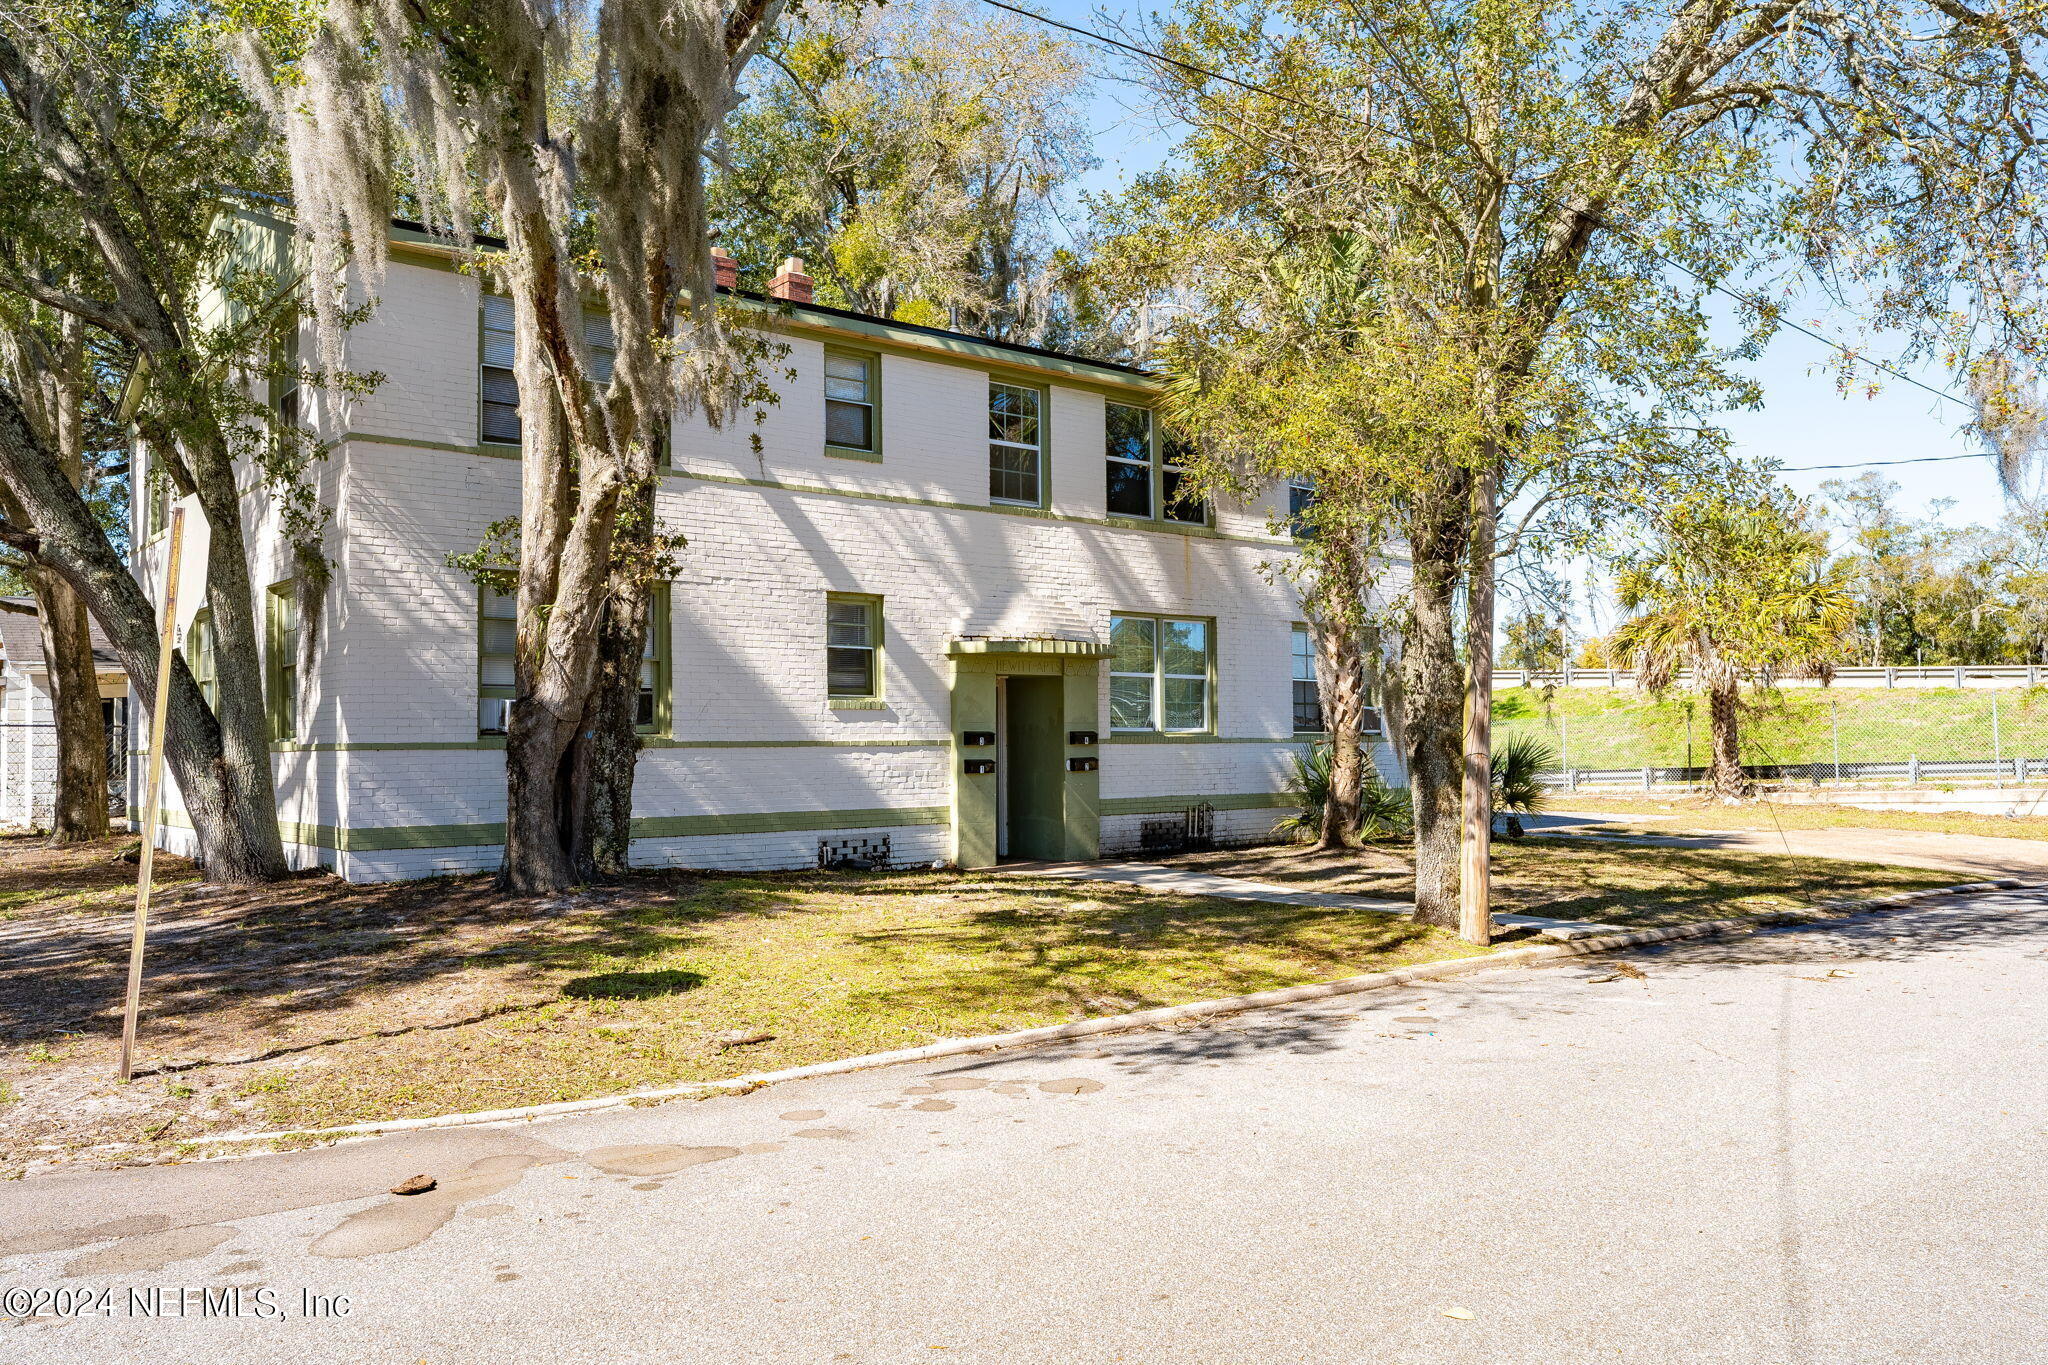 Jacksonville, FL home for sale located at 2906 Silver Street Unit 2, Jacksonville, FL 32206